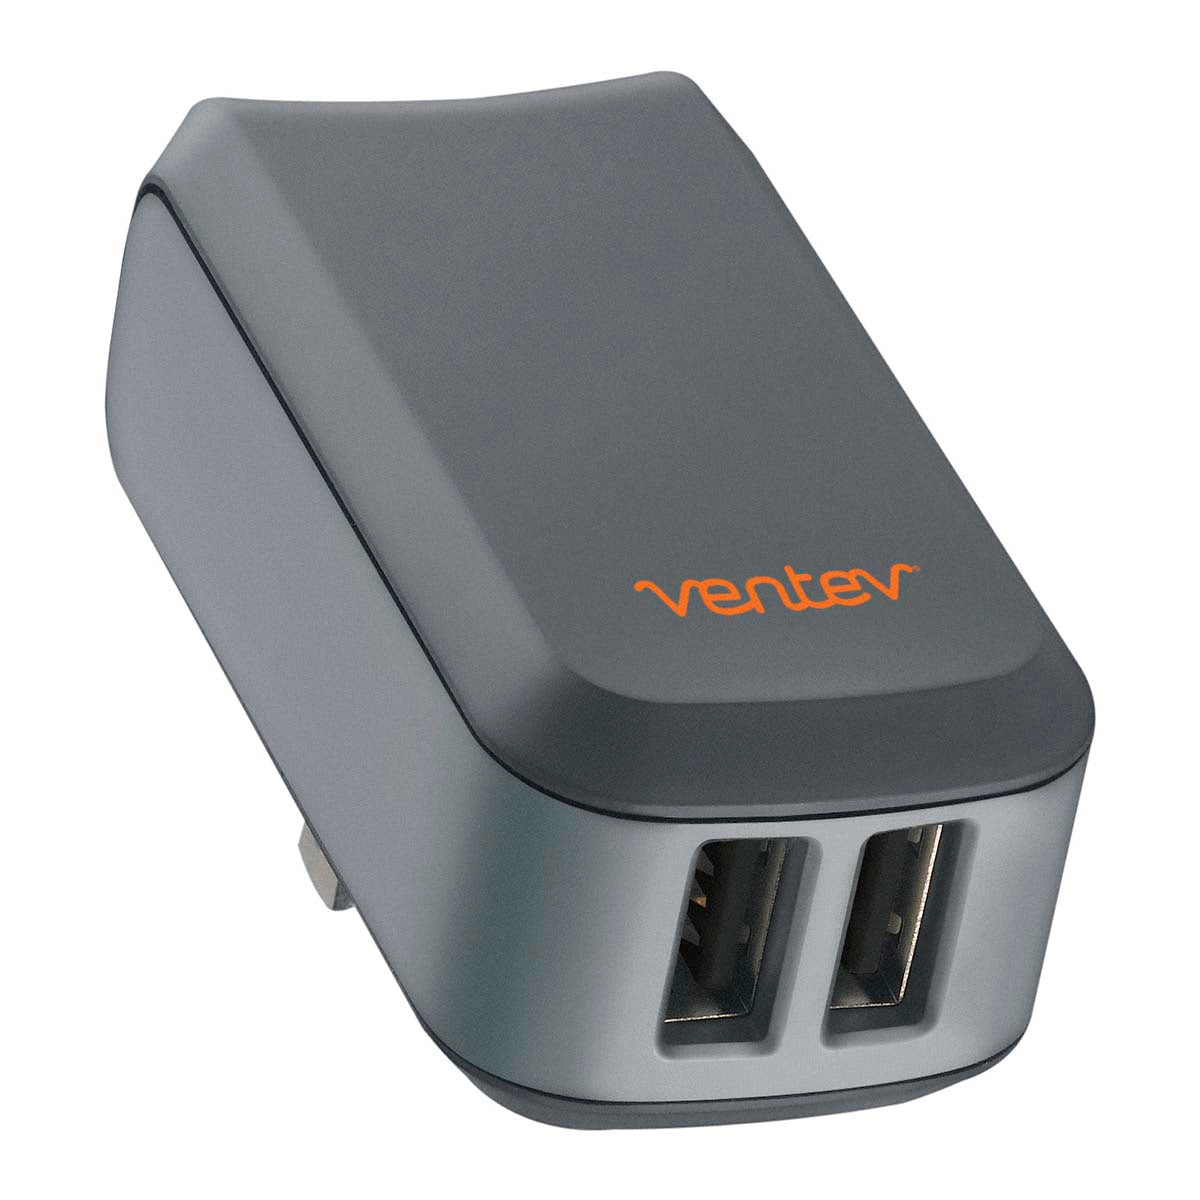 Ventev Wallport 2100 Wall Charger Dual 1A With Micro USB Cable